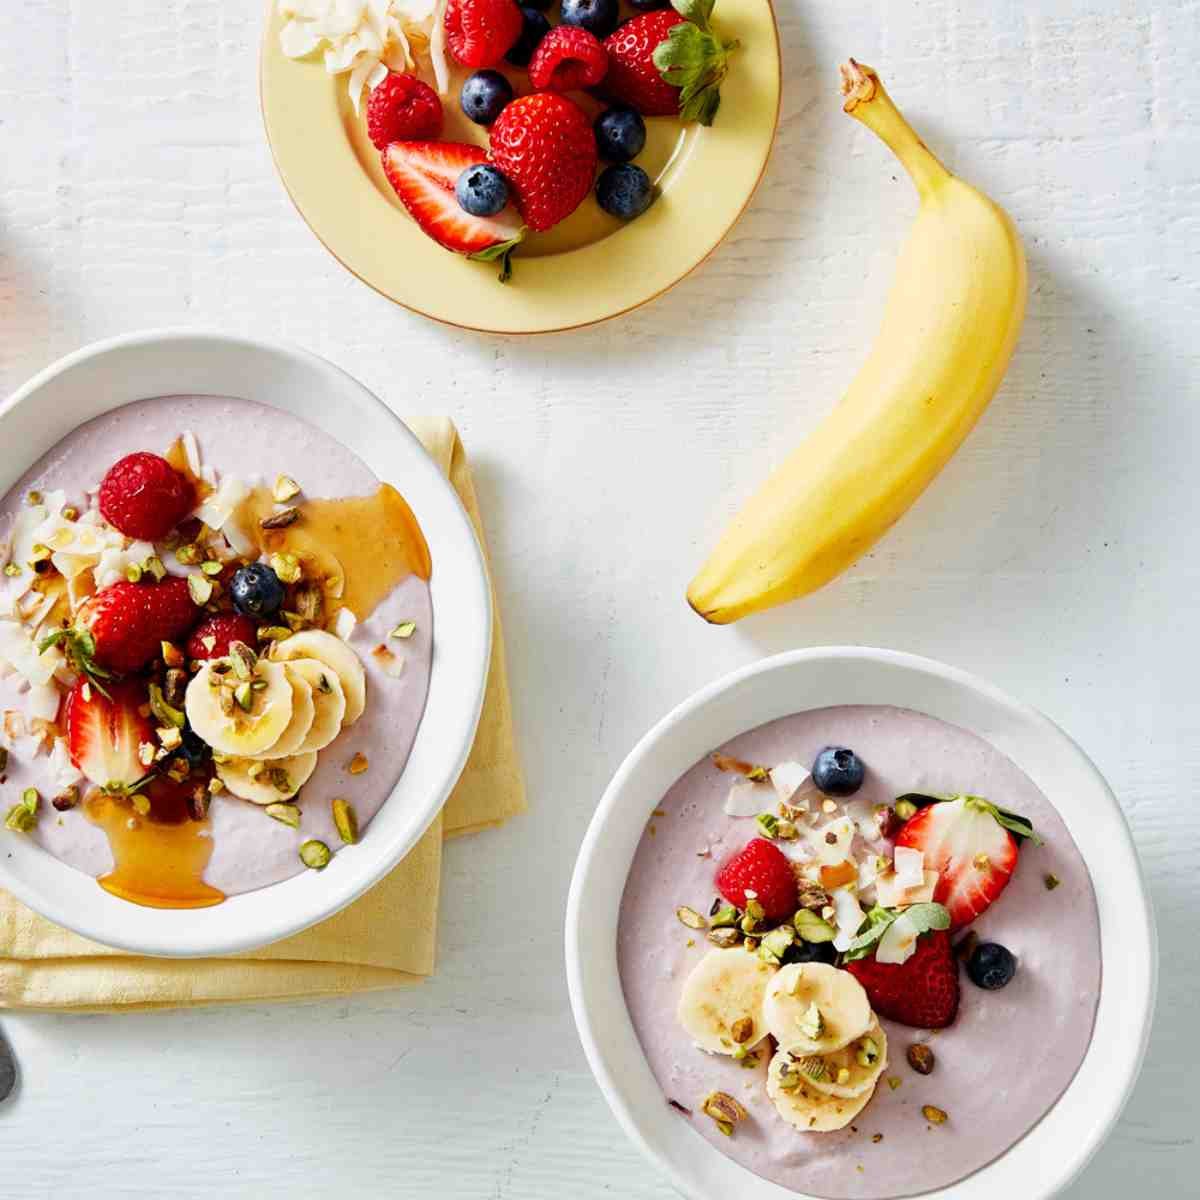 Two bowls filled with a dairy-free smoothie topped with fruits and bananas. On the top is a Havana banana, and a plate filled with cut berries.